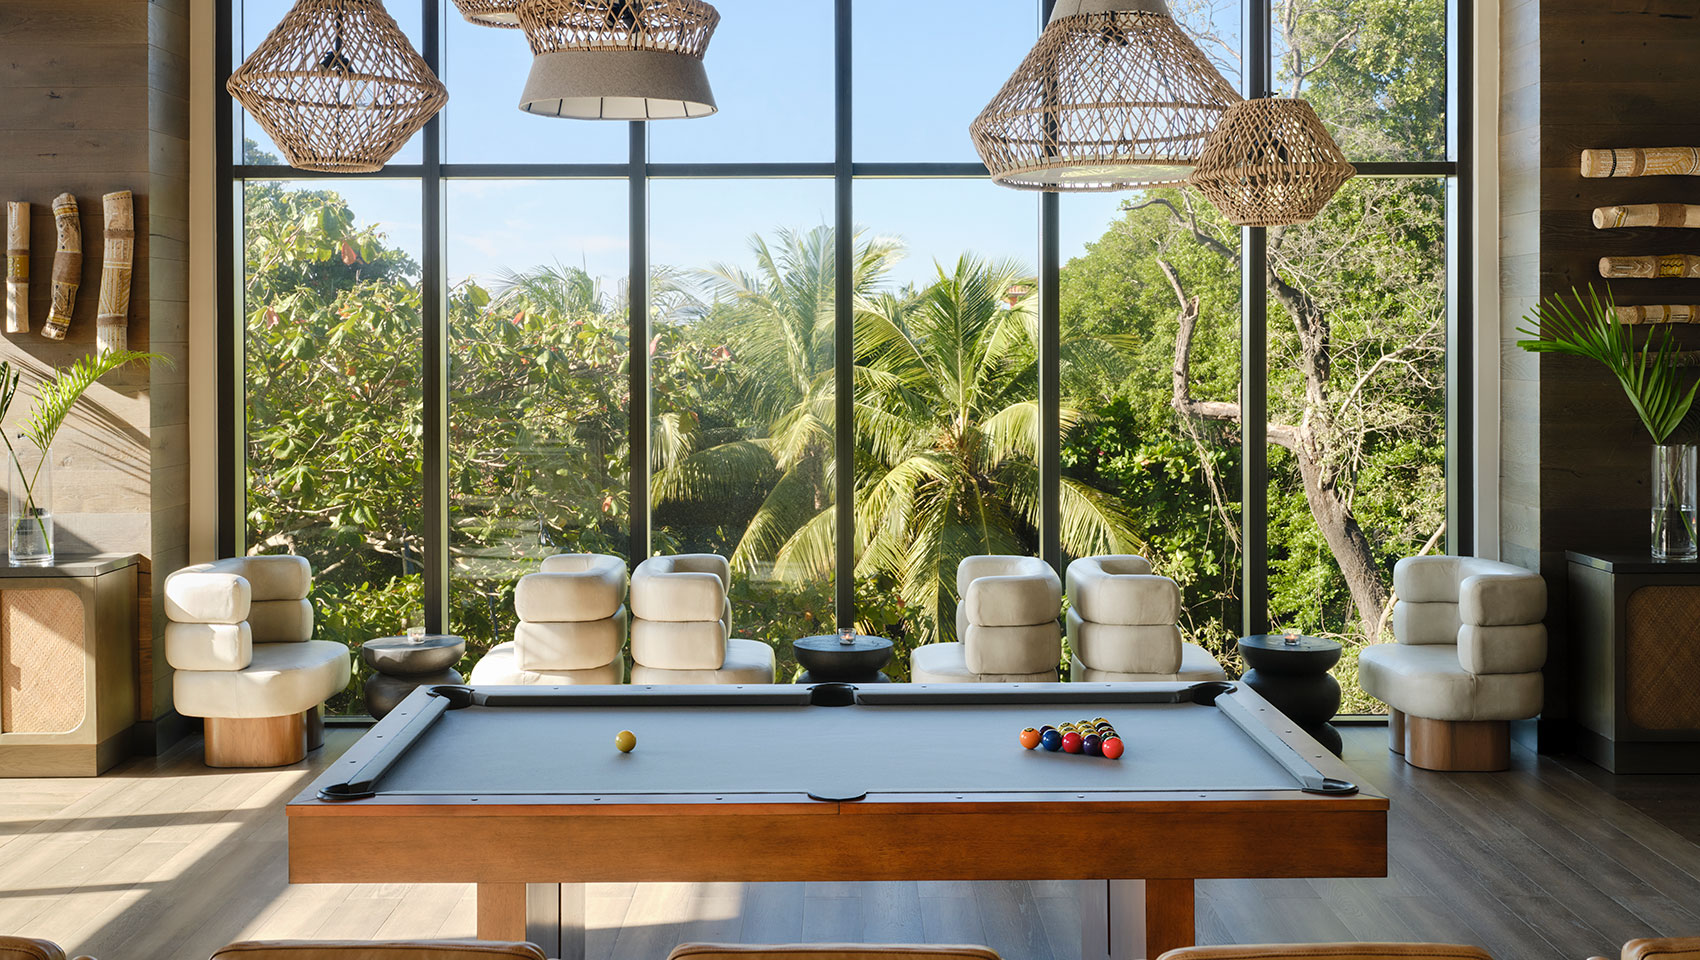 Image of Vos Cafe & Bar with pool table and view